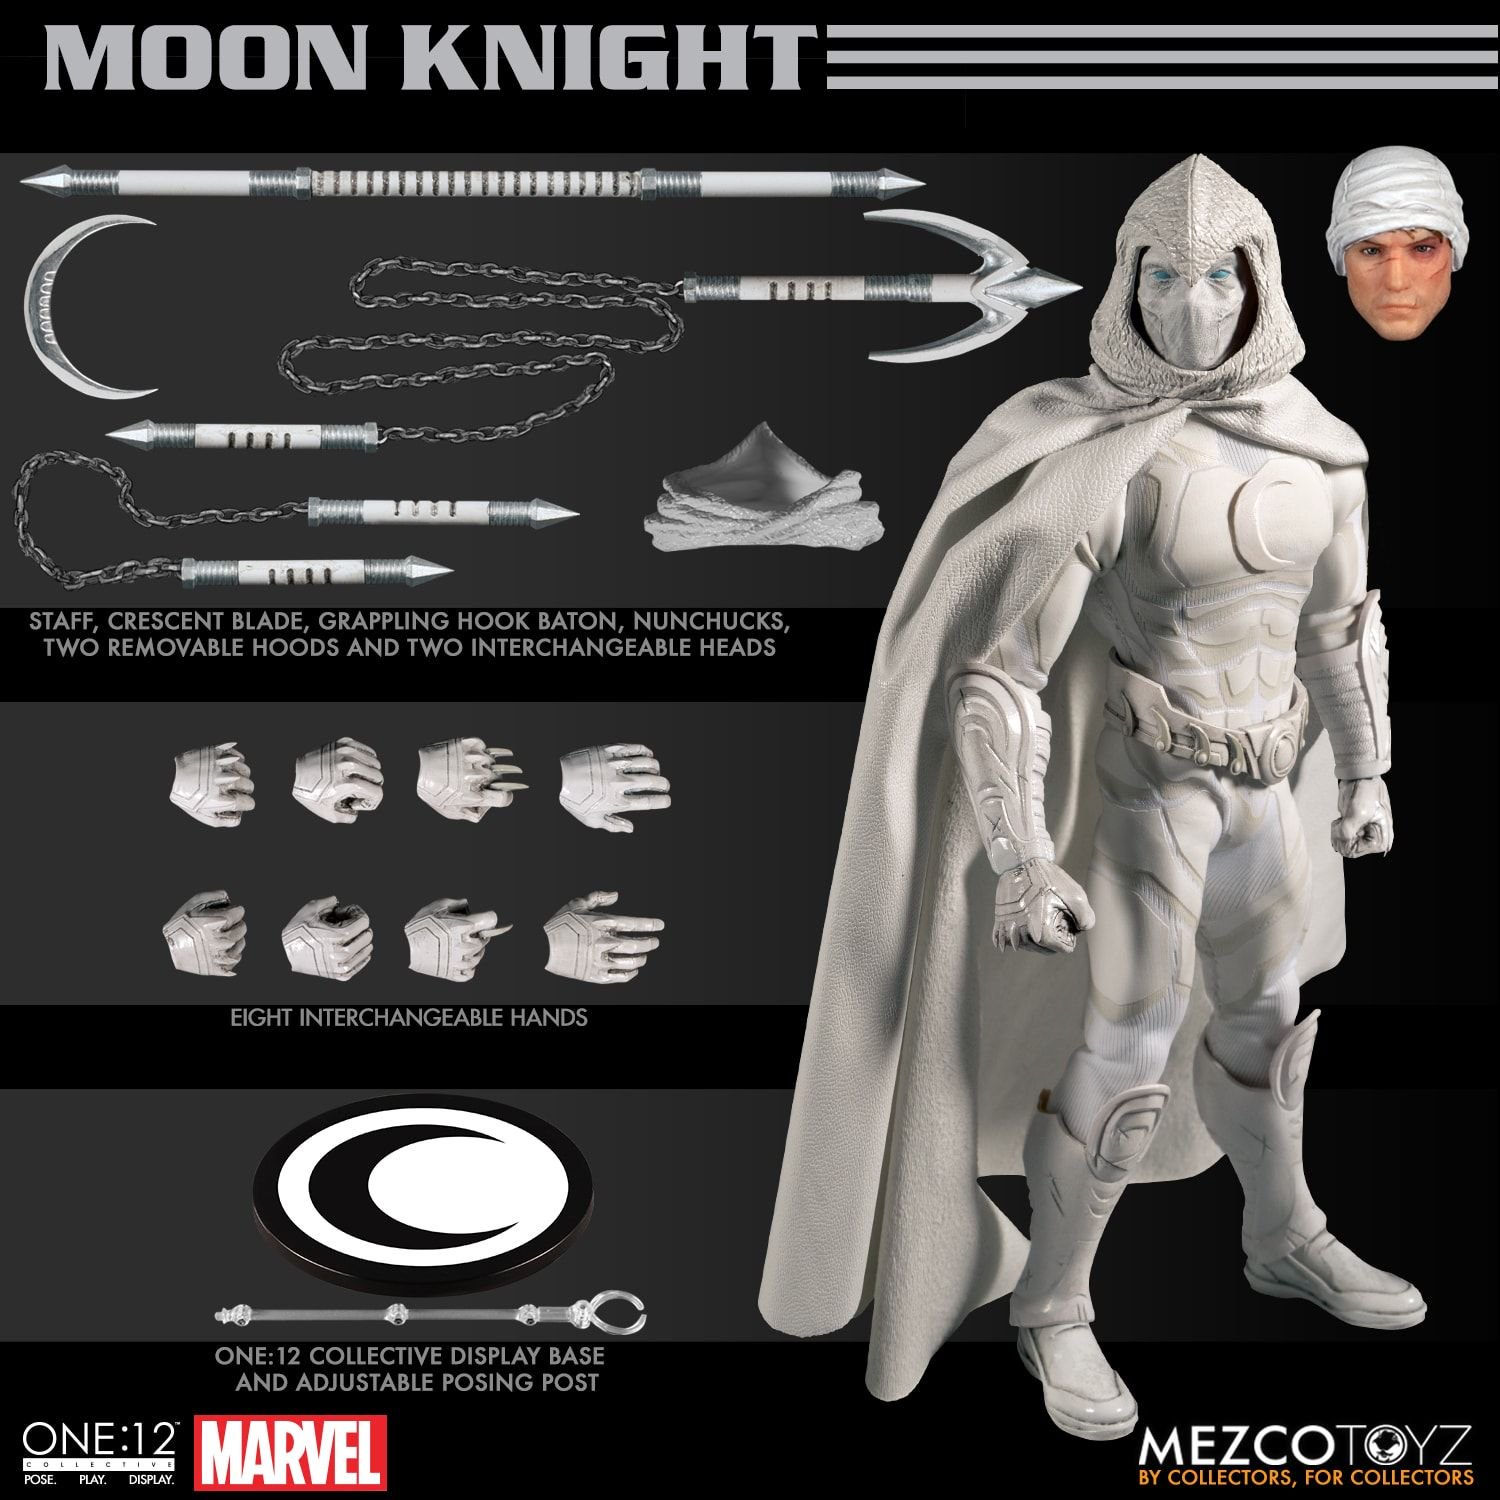 Mezco ONE:12 Collective Moon Knight Figure Up for Order! - Marvel